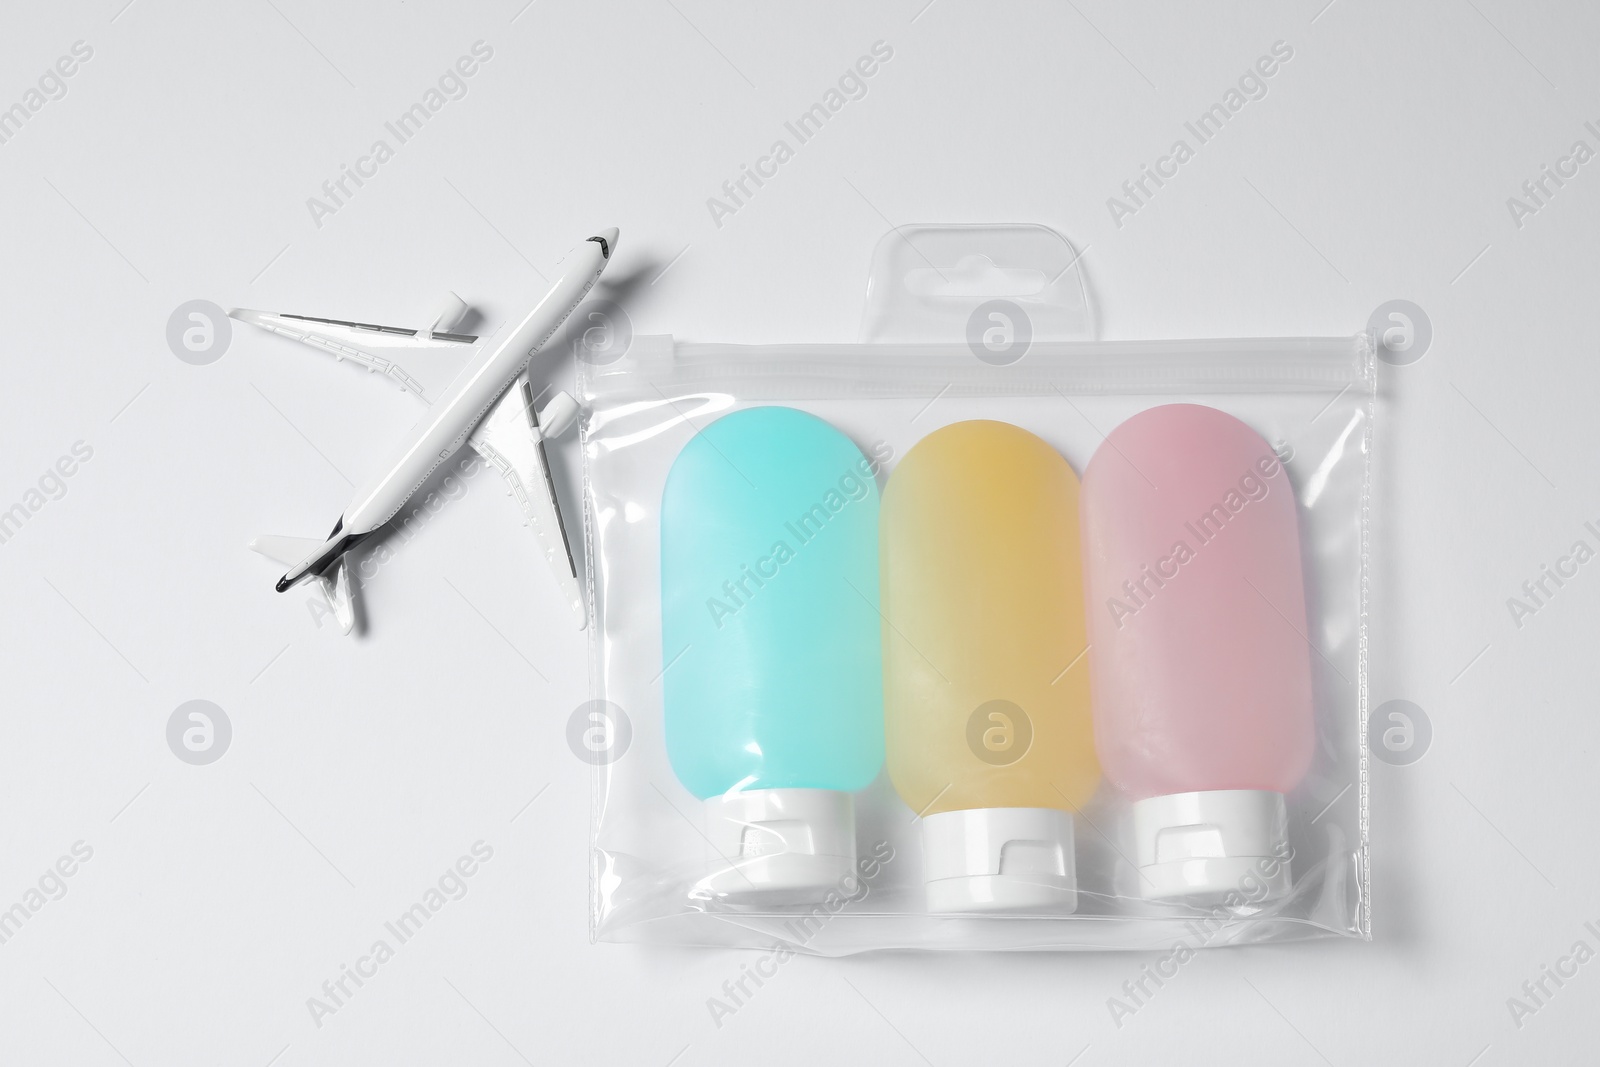 Photo of Cosmetic travel kit in plastic bag and toy plane on white background, top view. Bath accessories